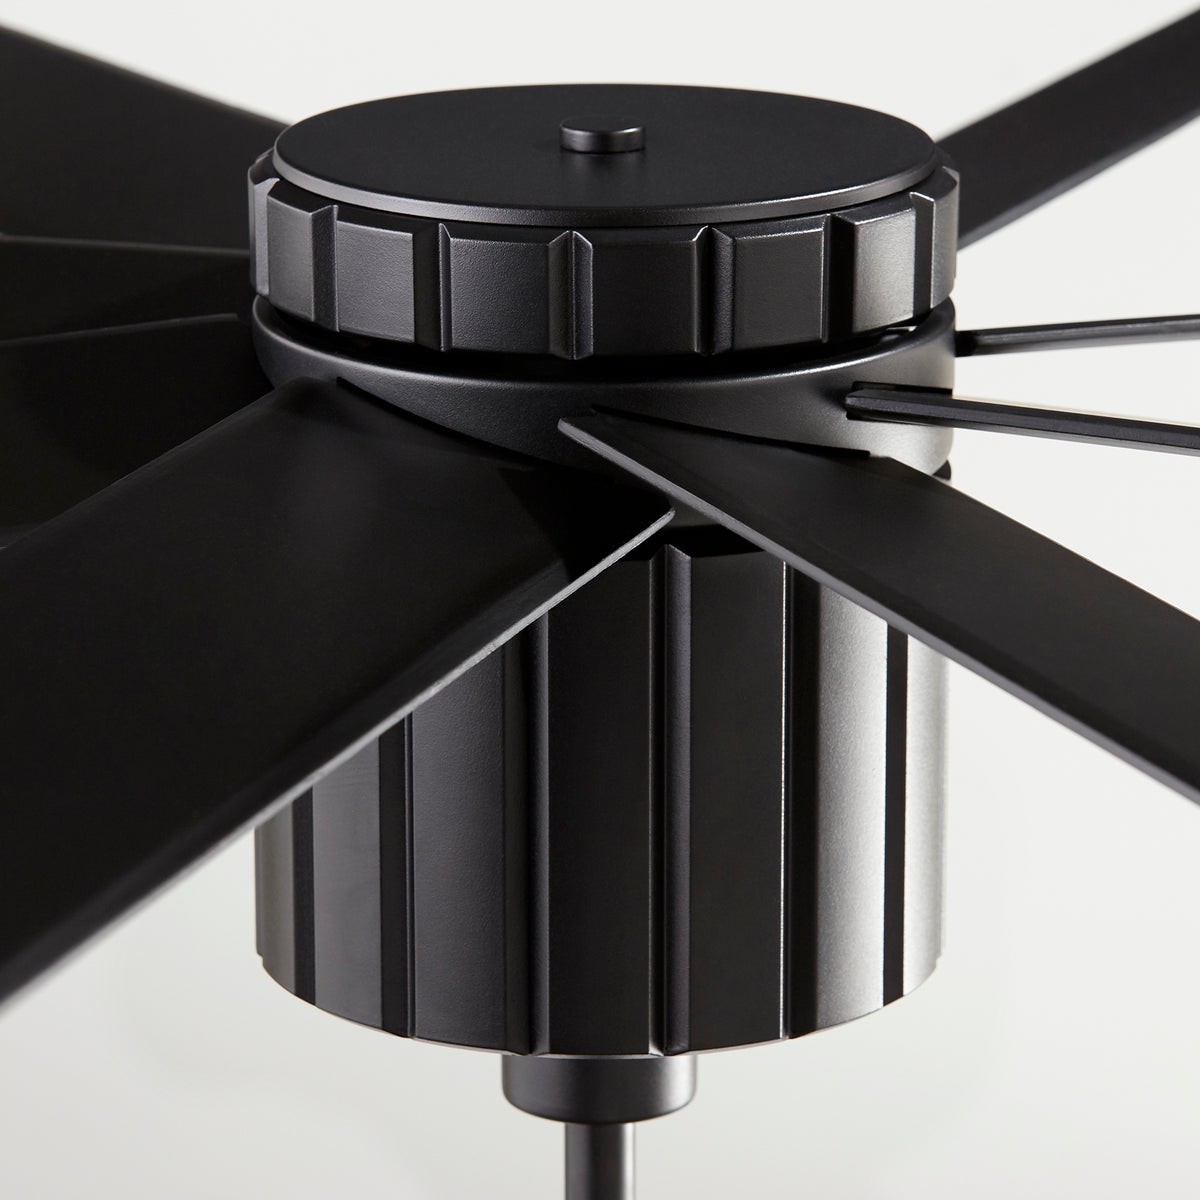 A sleek, sophisticated 72 inch ceiling fan with upturned blades for maximum air circulation. Its cylindrical housing adds contemporary artistry to its beauty.